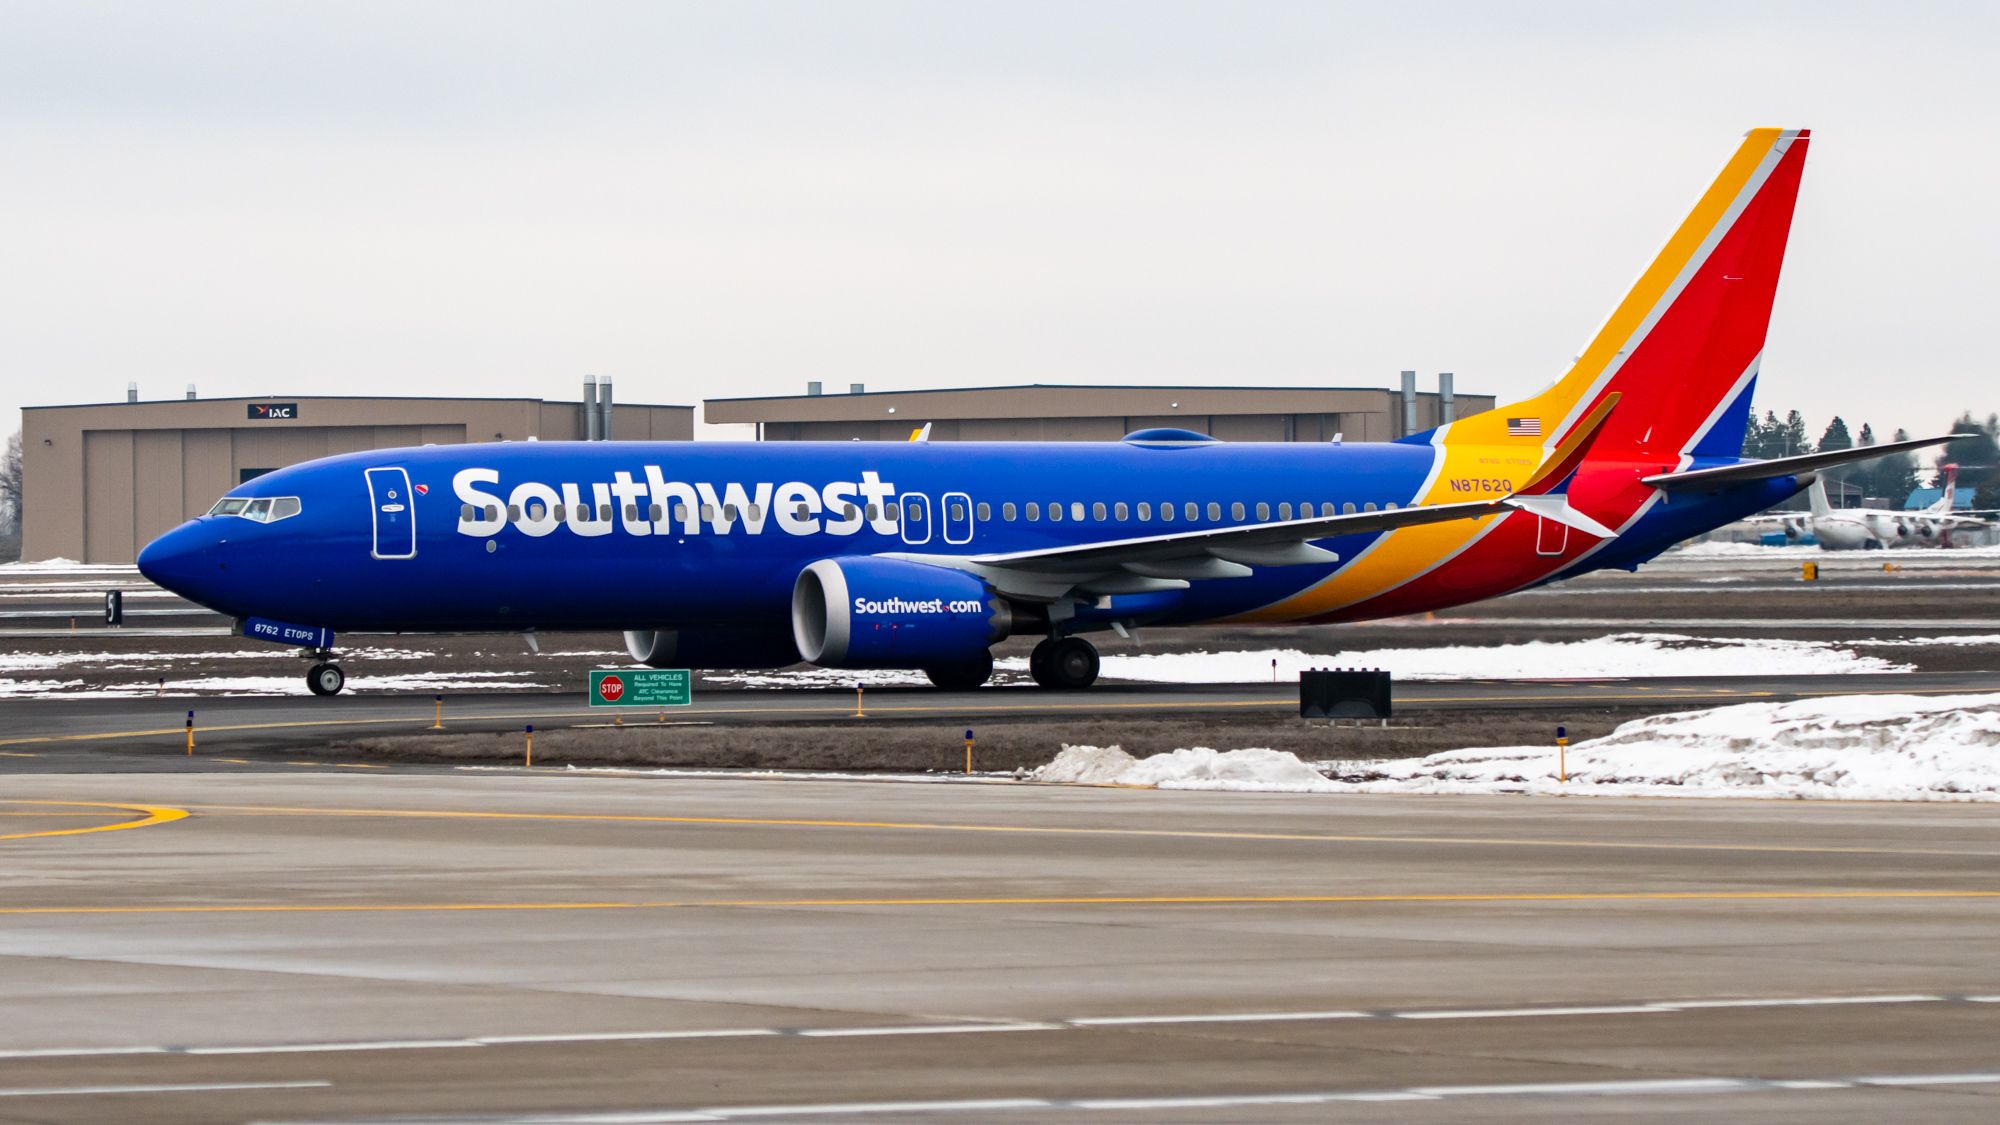 A Southwest Airlines' 737 MAX 8 taxiing at snowy Spokane International Airport (GEG)